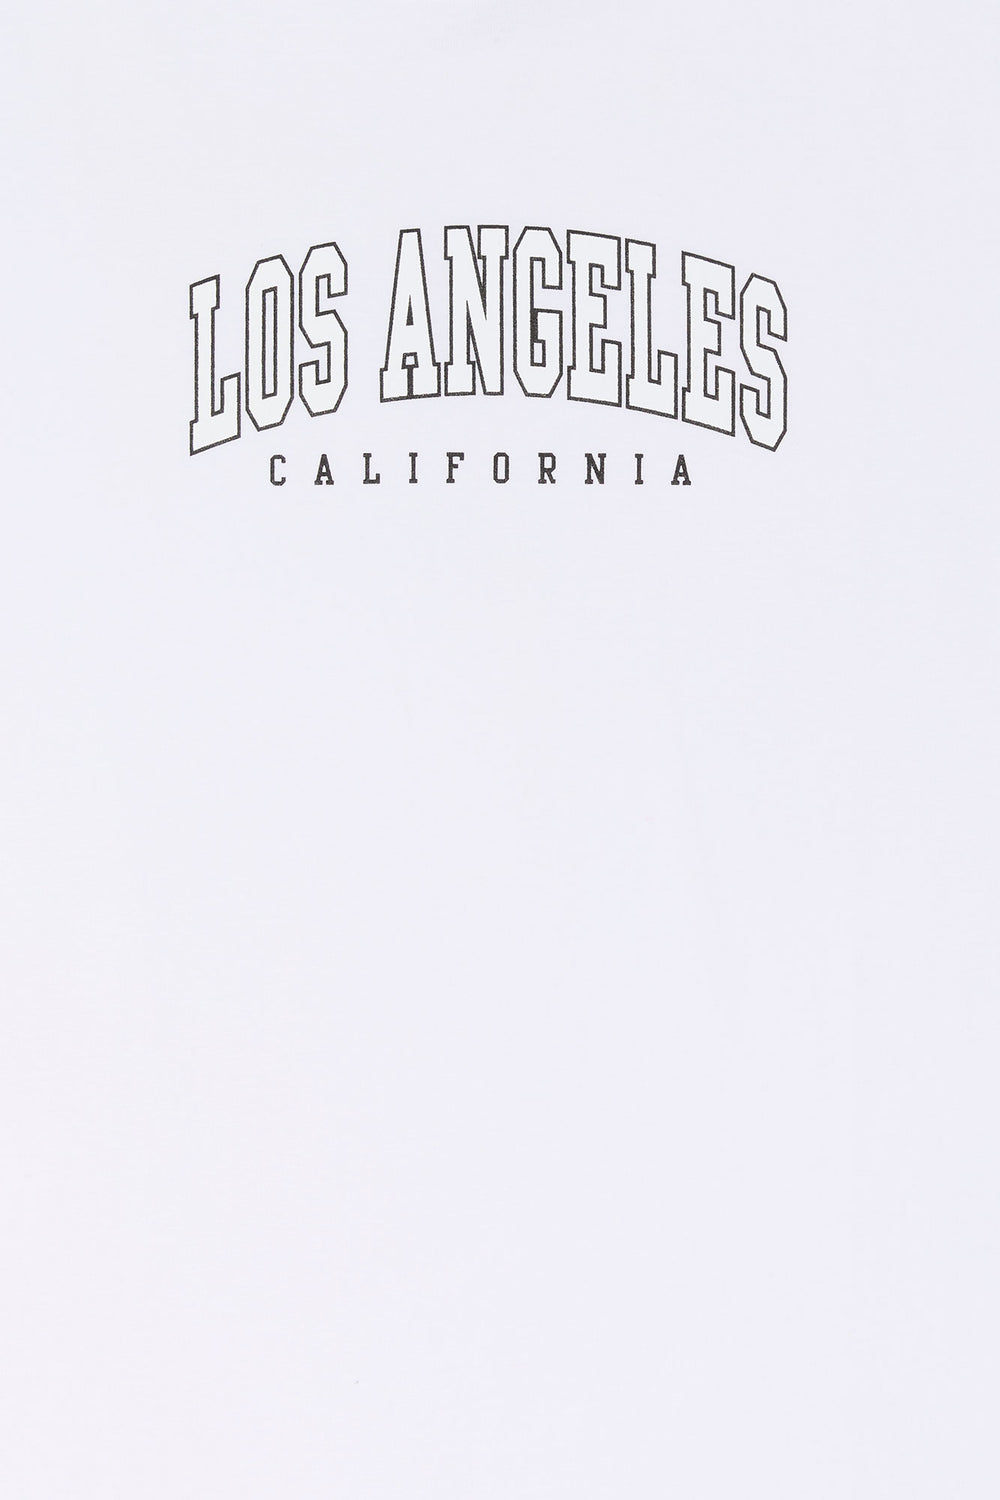 Los Angeles Graphic T-Shirt Los Angeles Graphic T-Shirt 1